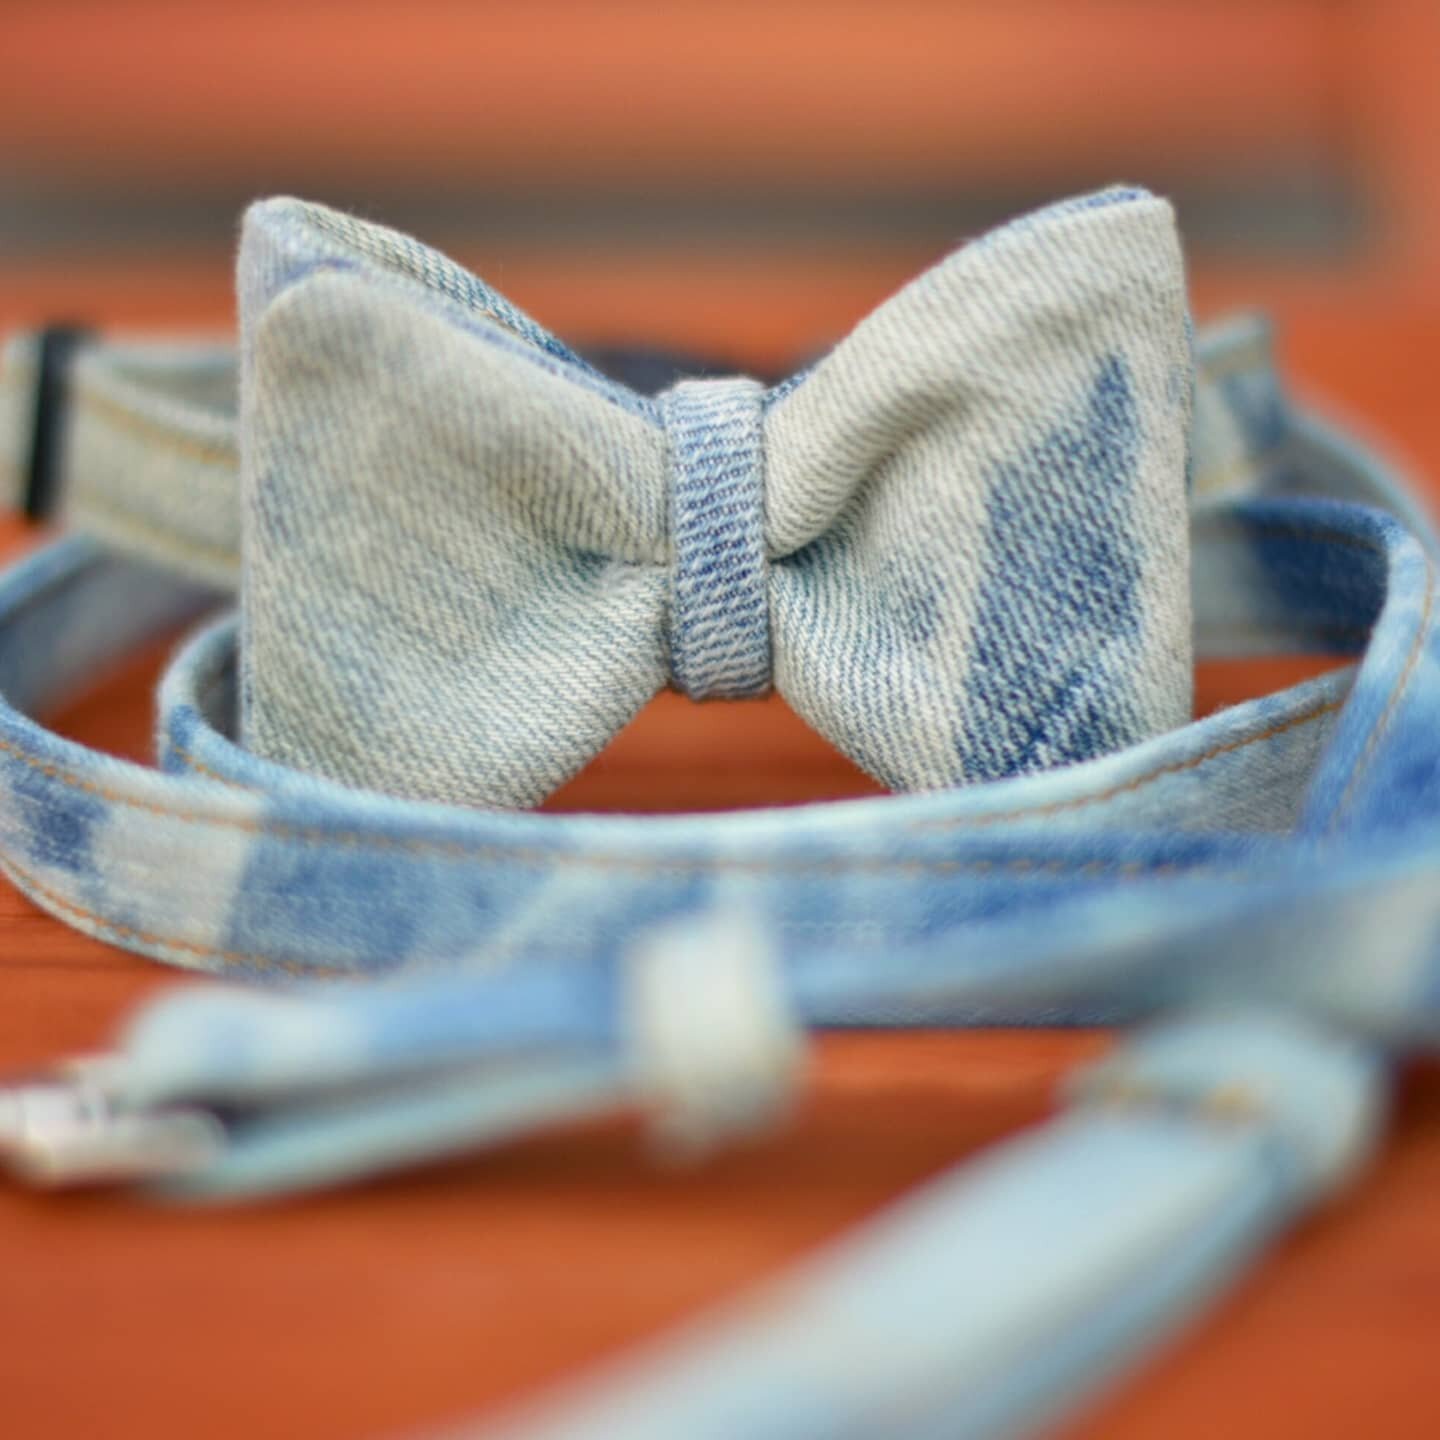 Make a donation and receive a gift! 🐕 
#mistermigs #doggearforgood 
___________
Click #linkinbio to browse our gift gallery of denim #bowties, #leashes and MORE! 👖
__________
Your donation benefits young adults with #autism and #developmentaldisabi